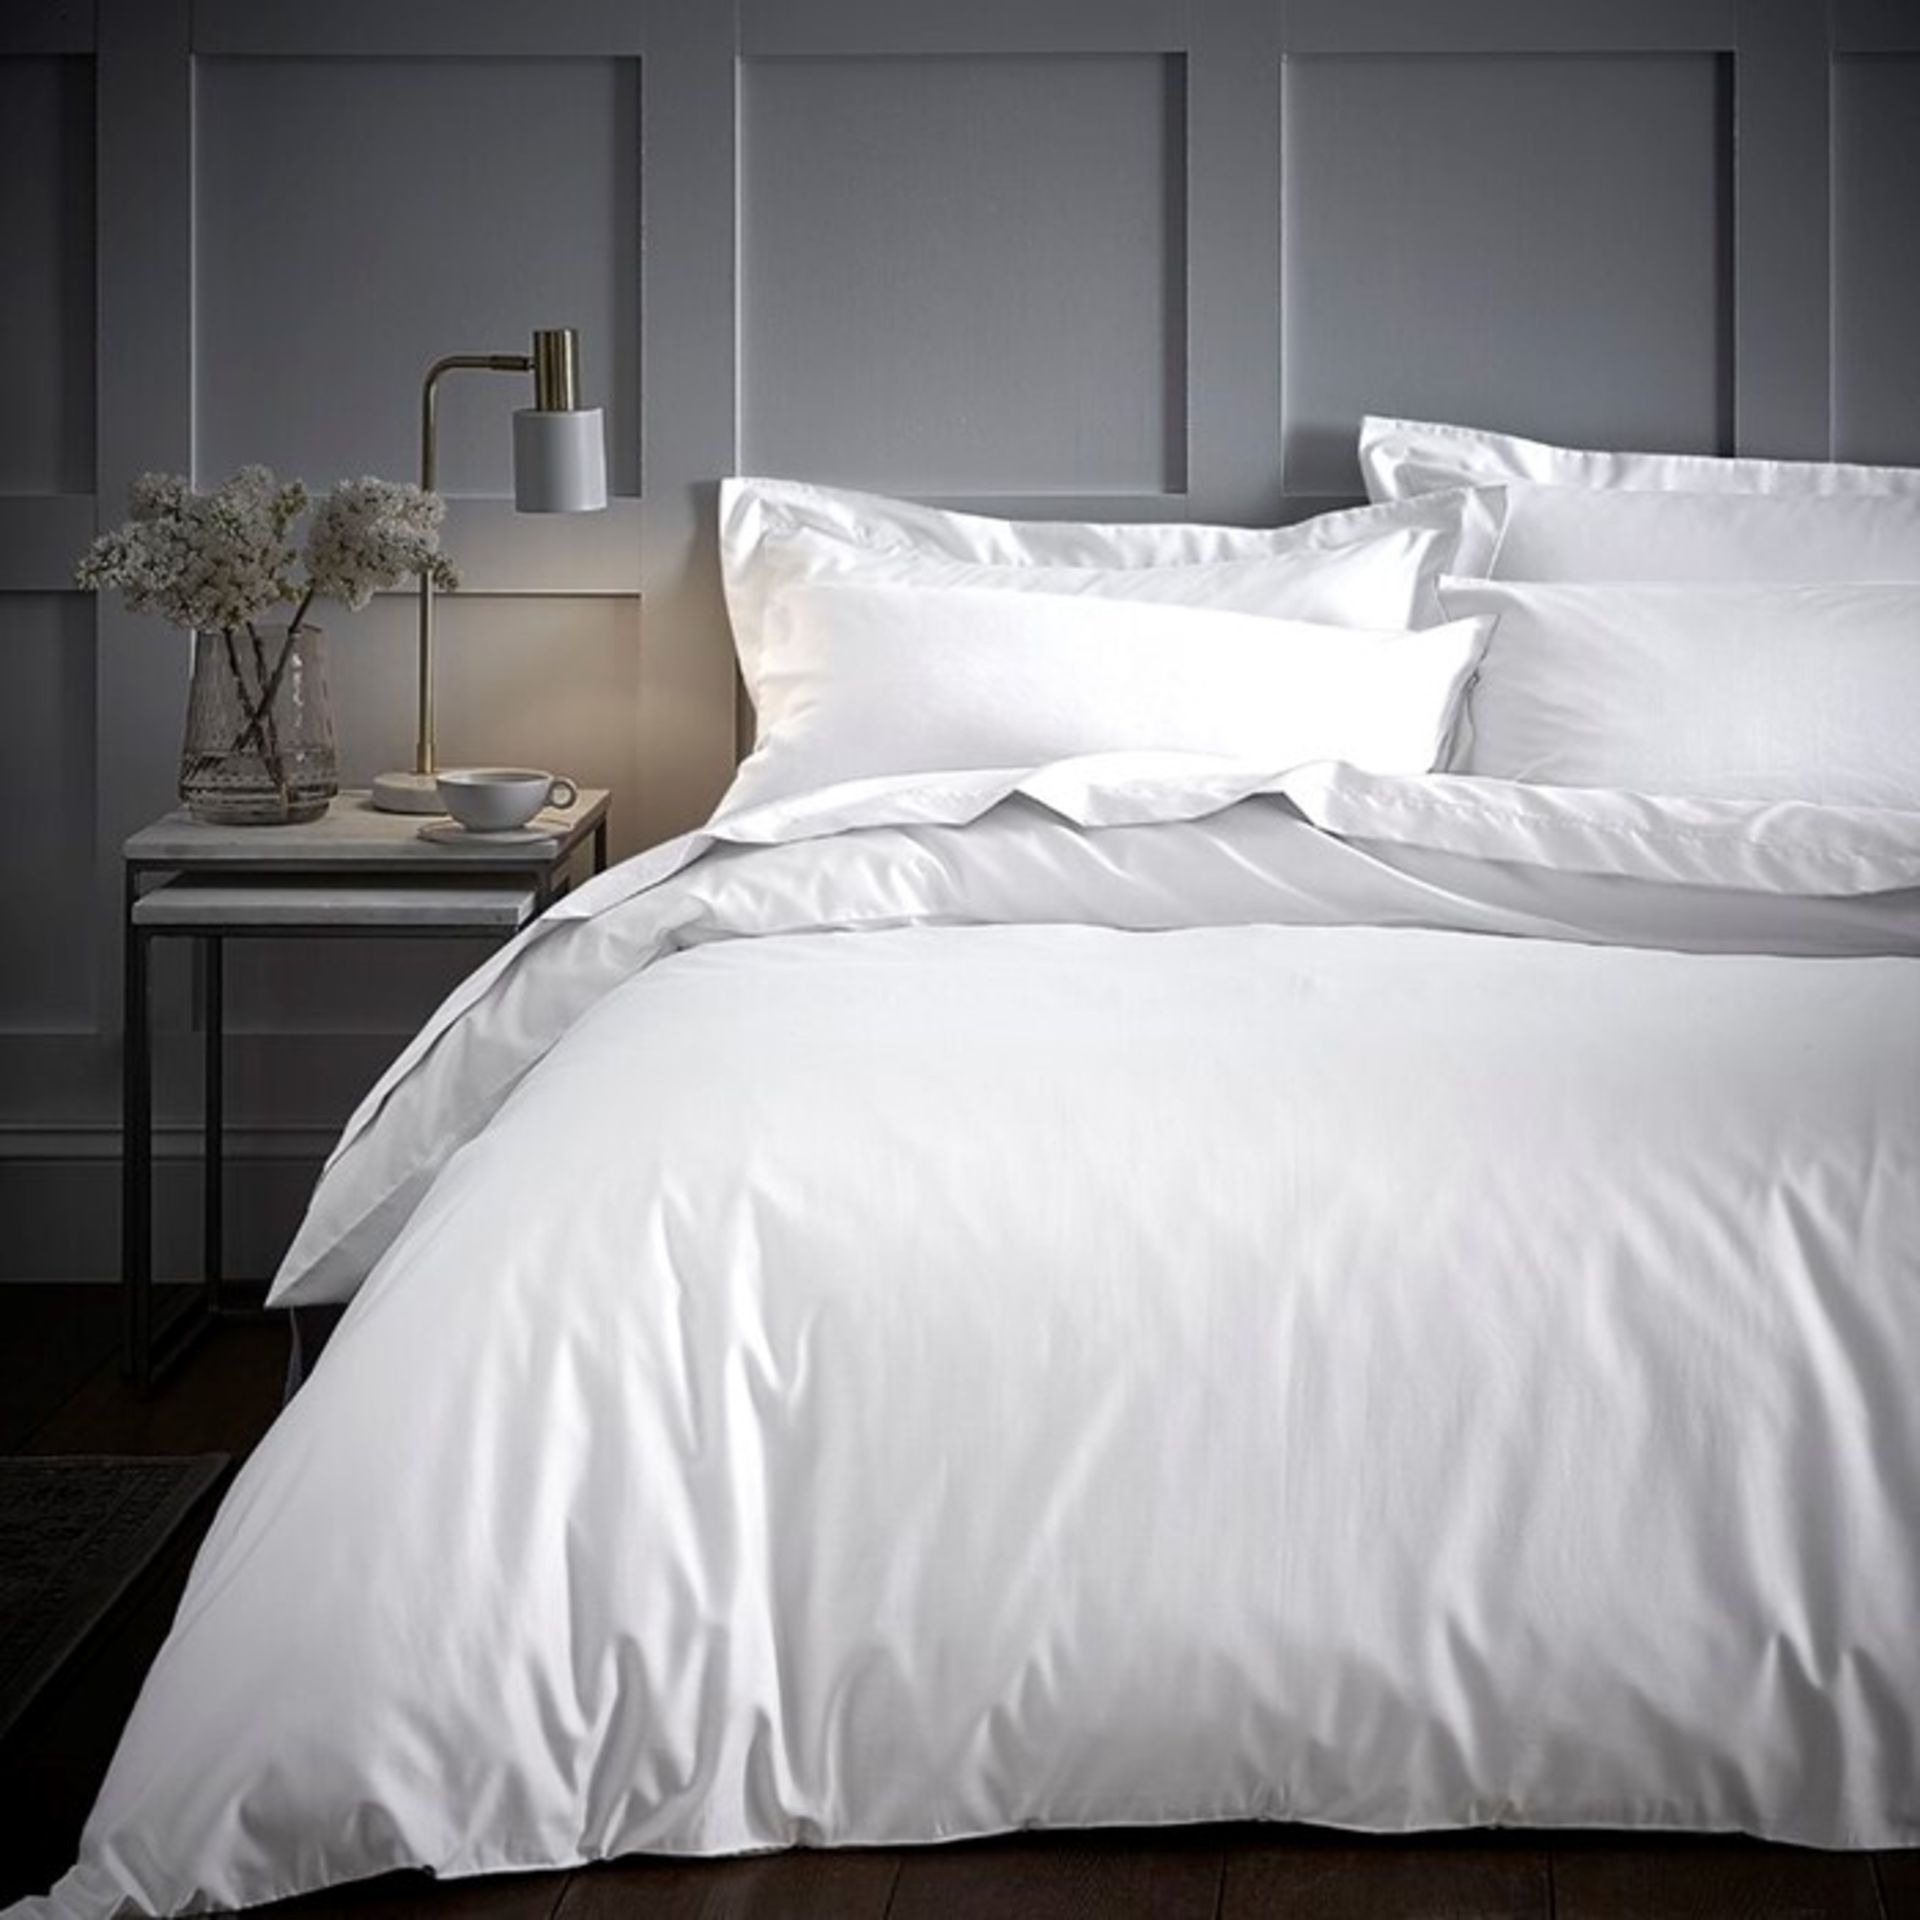 Content by Terence Conran, 300 TC Duvet Cover (WHITE)(SINGLE)(DUVET COVER ONLY) - RRP £28.99 (